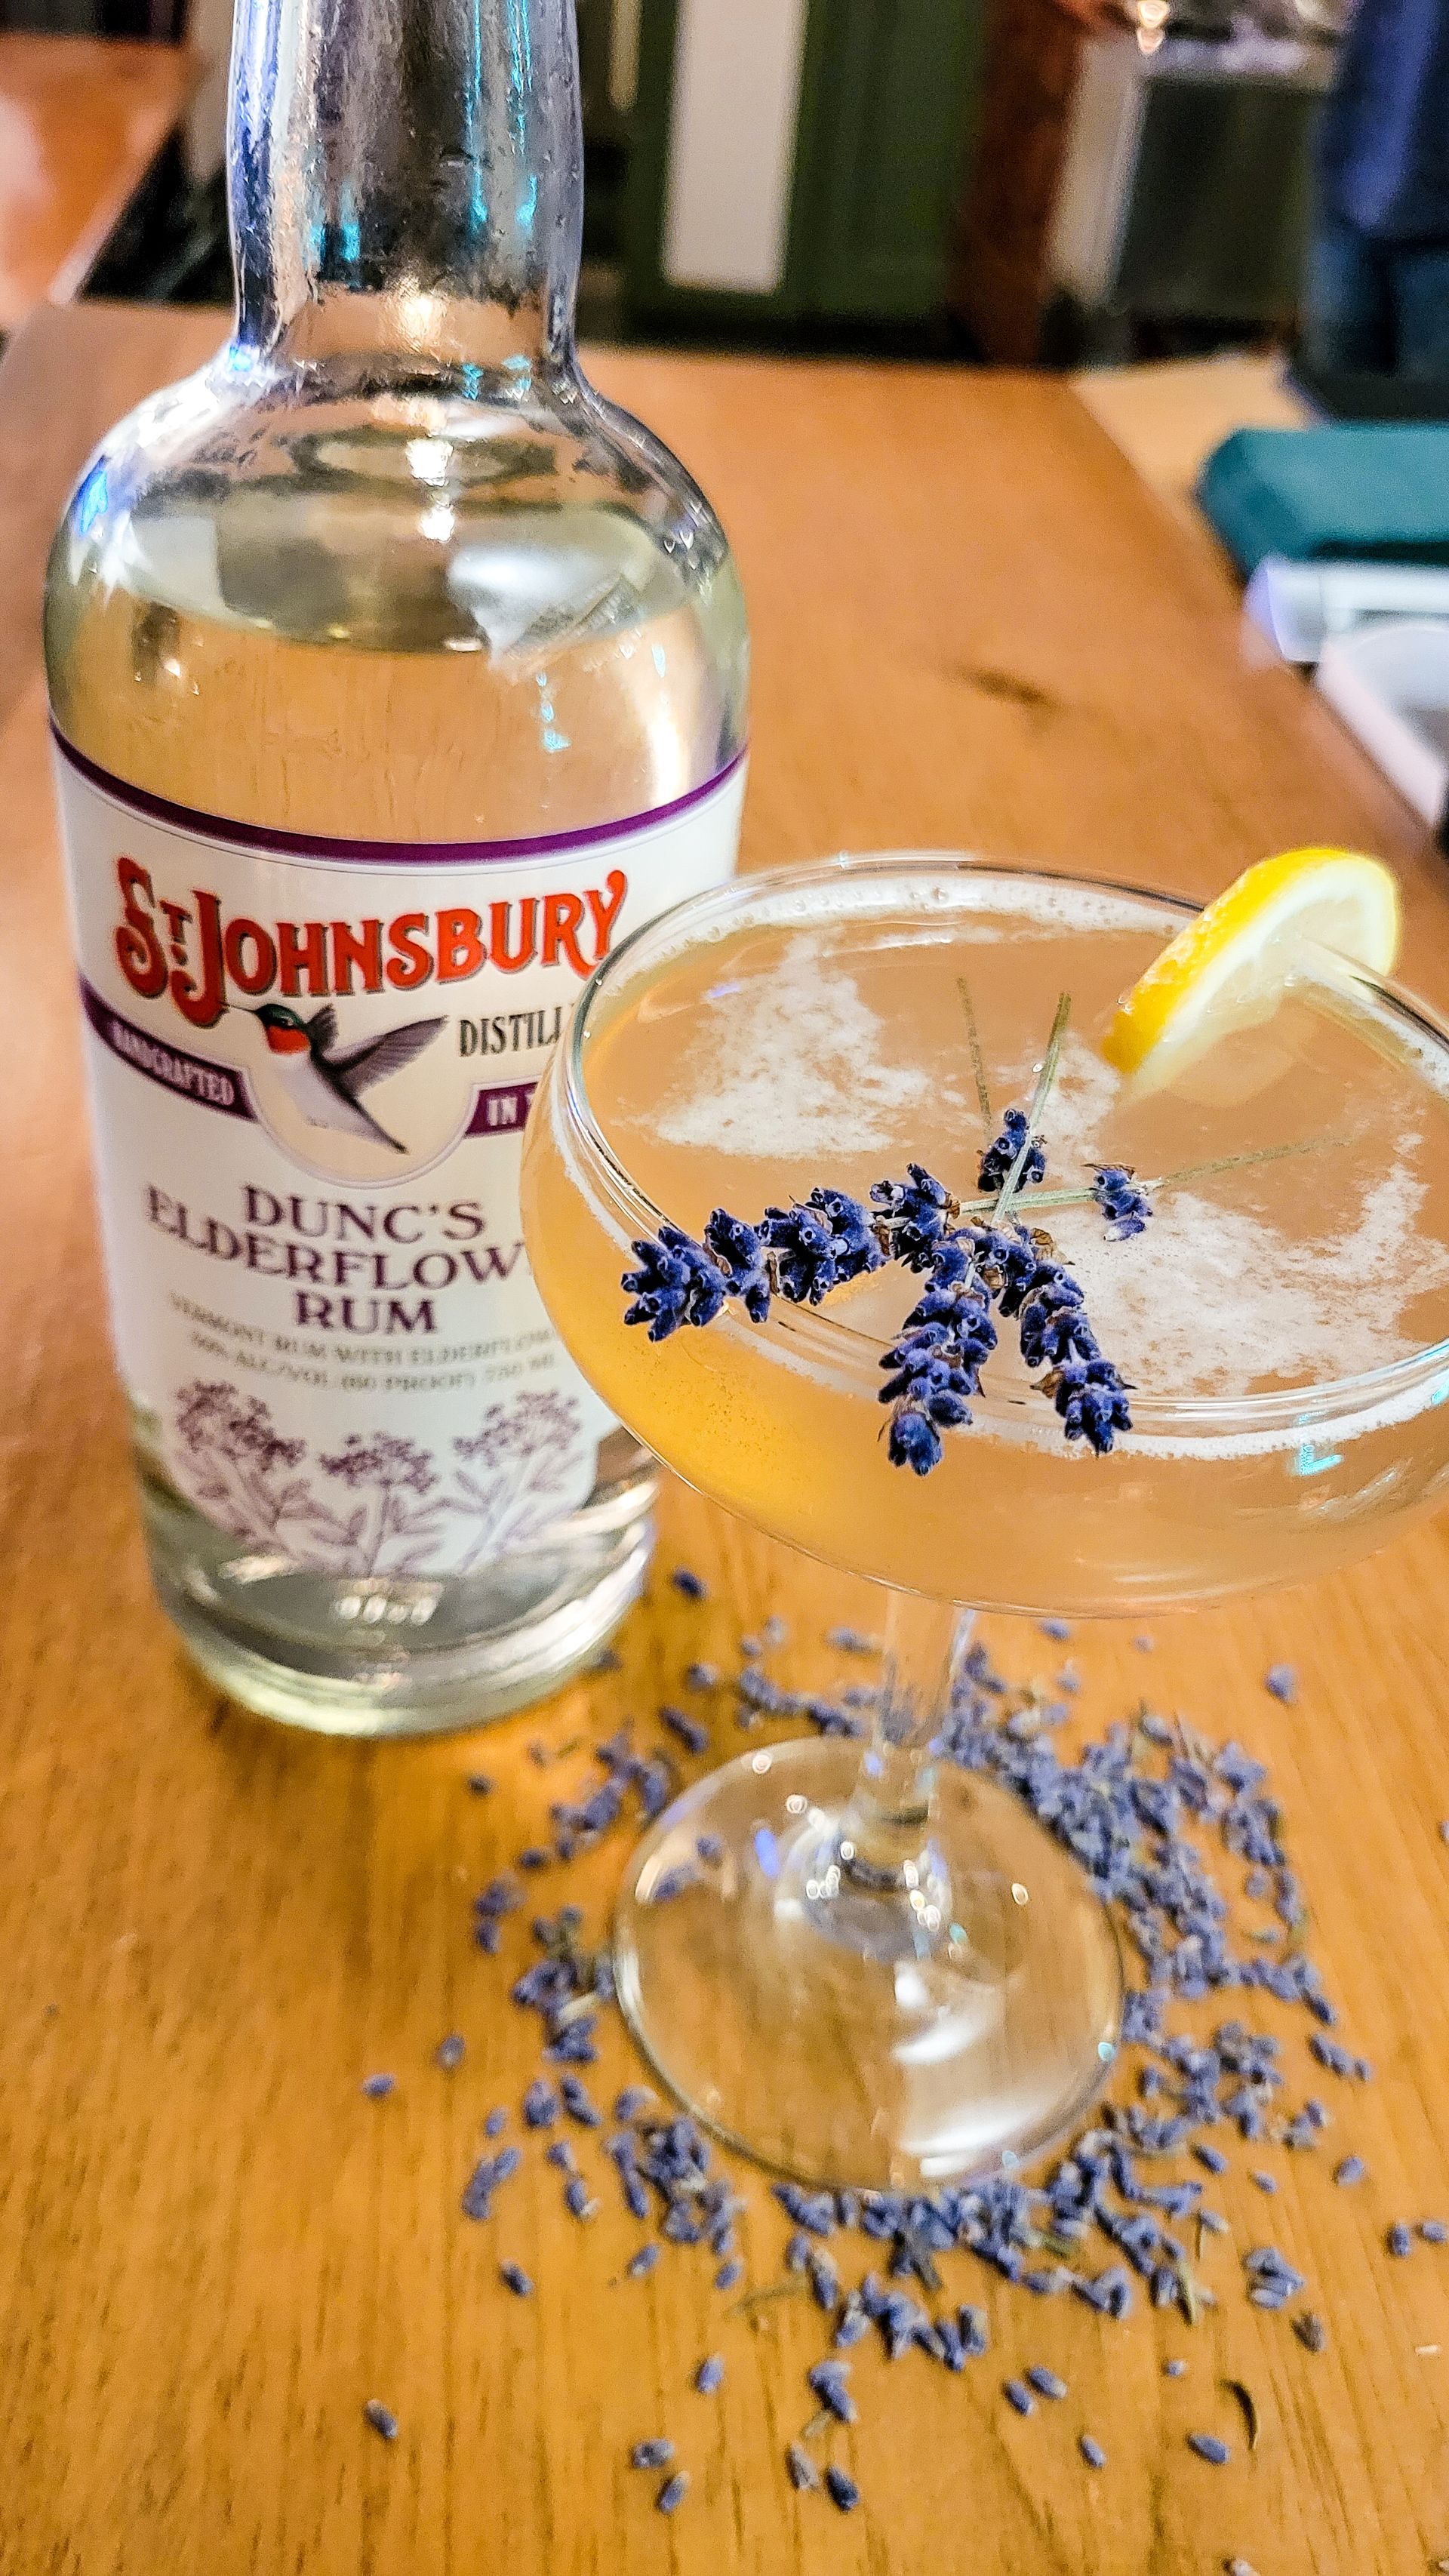 A bottle of St. Johnsbury distillery Dunc's Elderflow Rum. With a glass full of Rum, a slice of lemon and a decorative spring of Lavender.